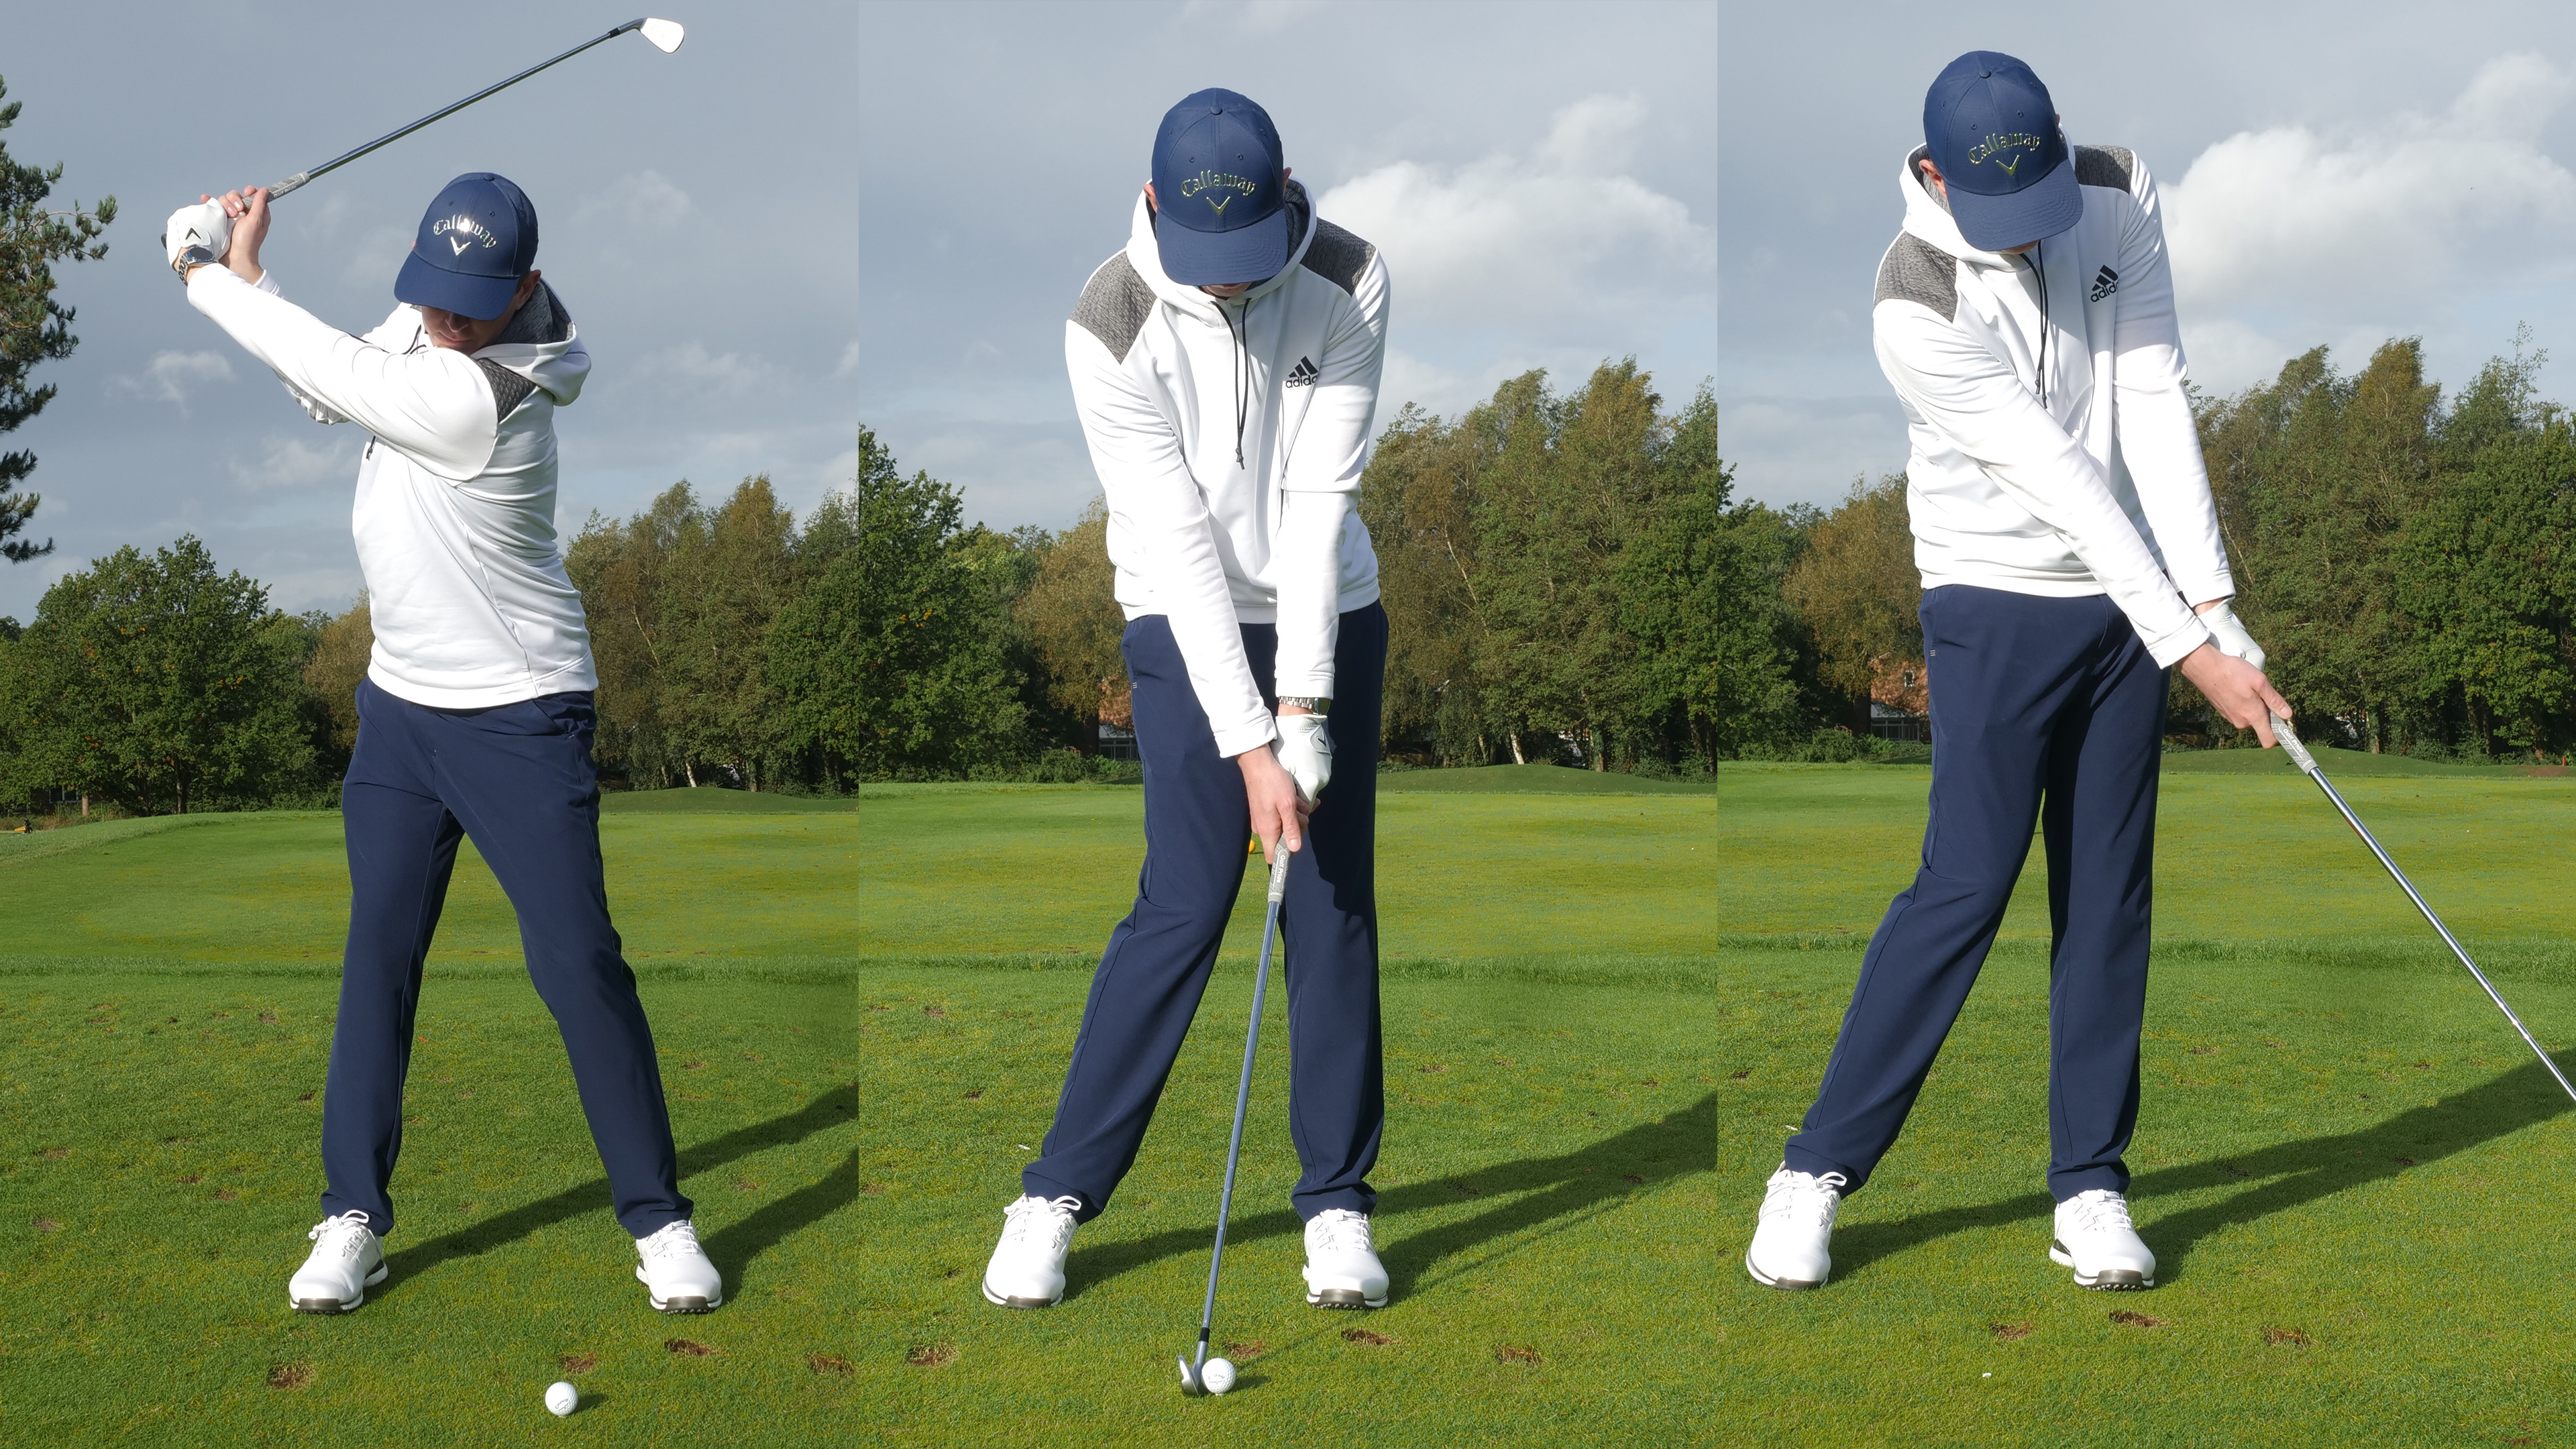 What Is The Release In The Golf Swing?